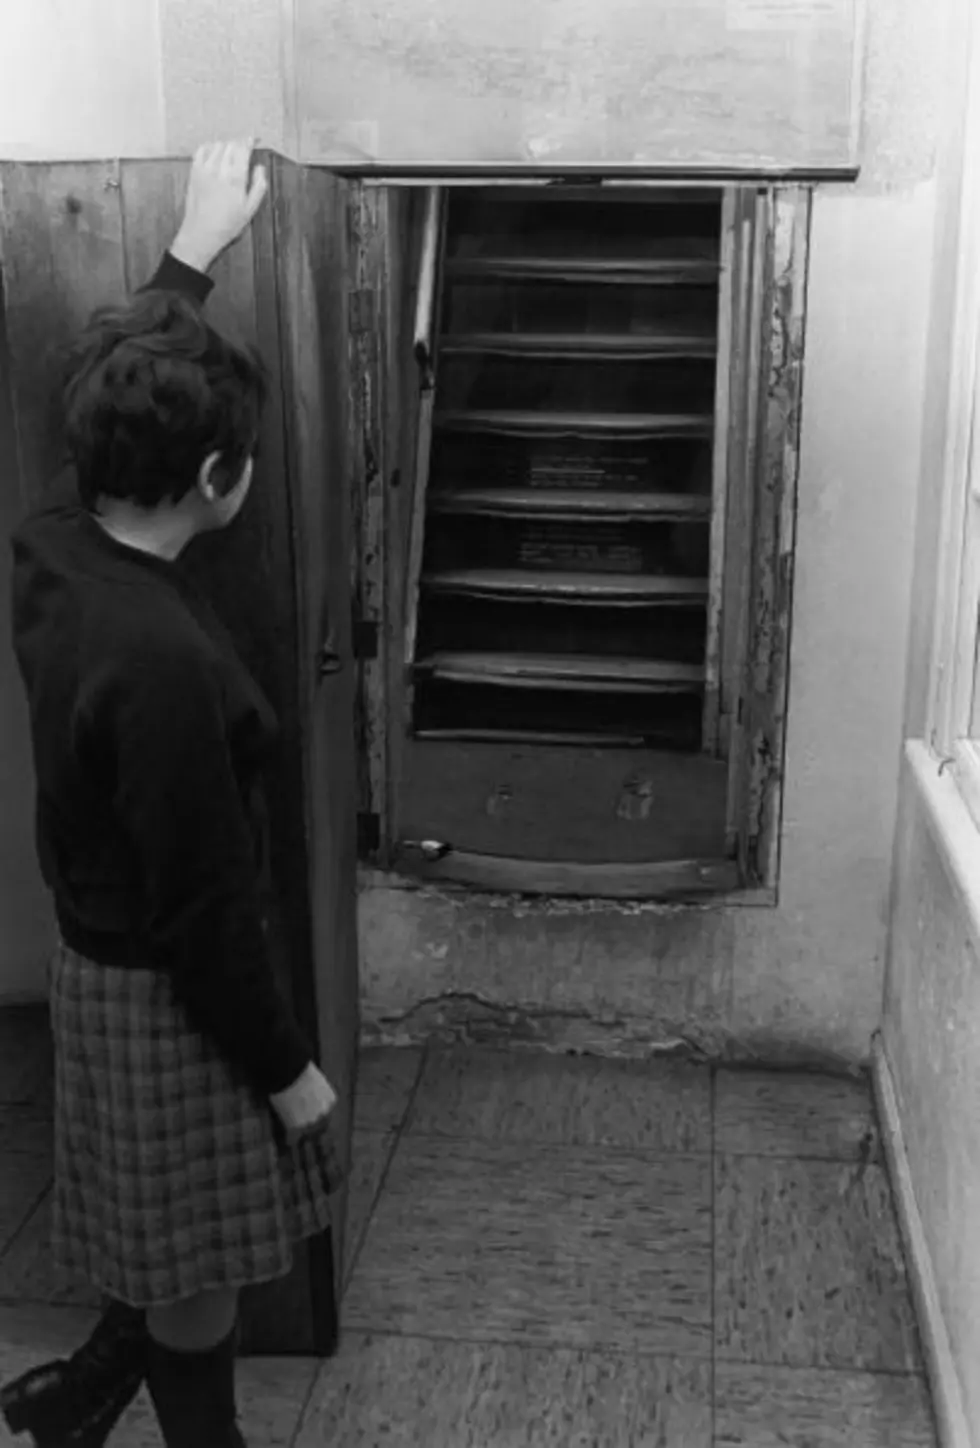 Family Finds Hidden Staircase That Leads To Creepy Secret [PHOTOS]